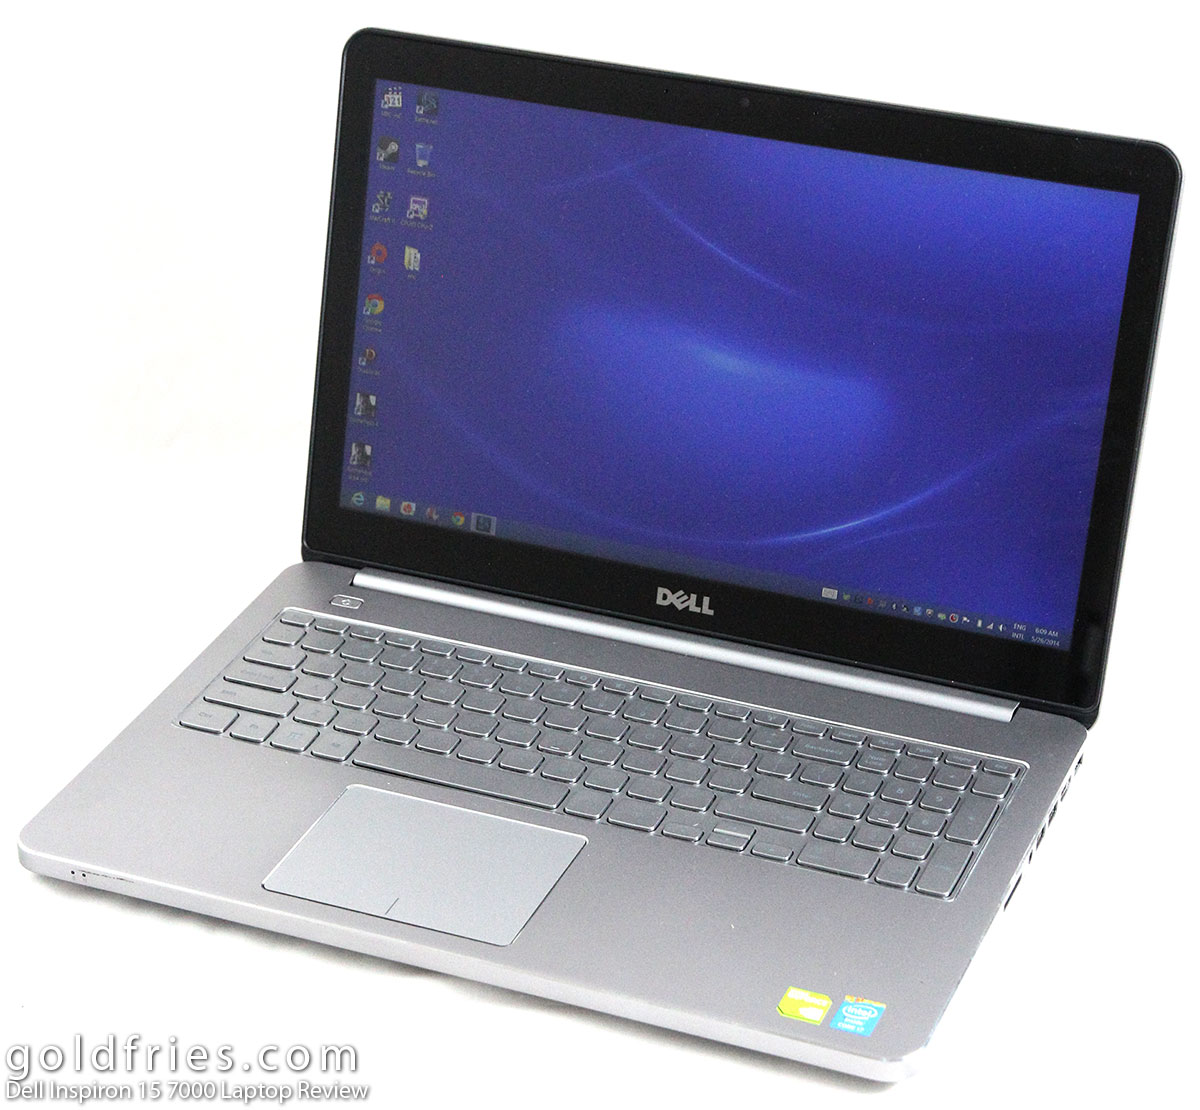 Dell Inspiron 15 7000 Laptop Review